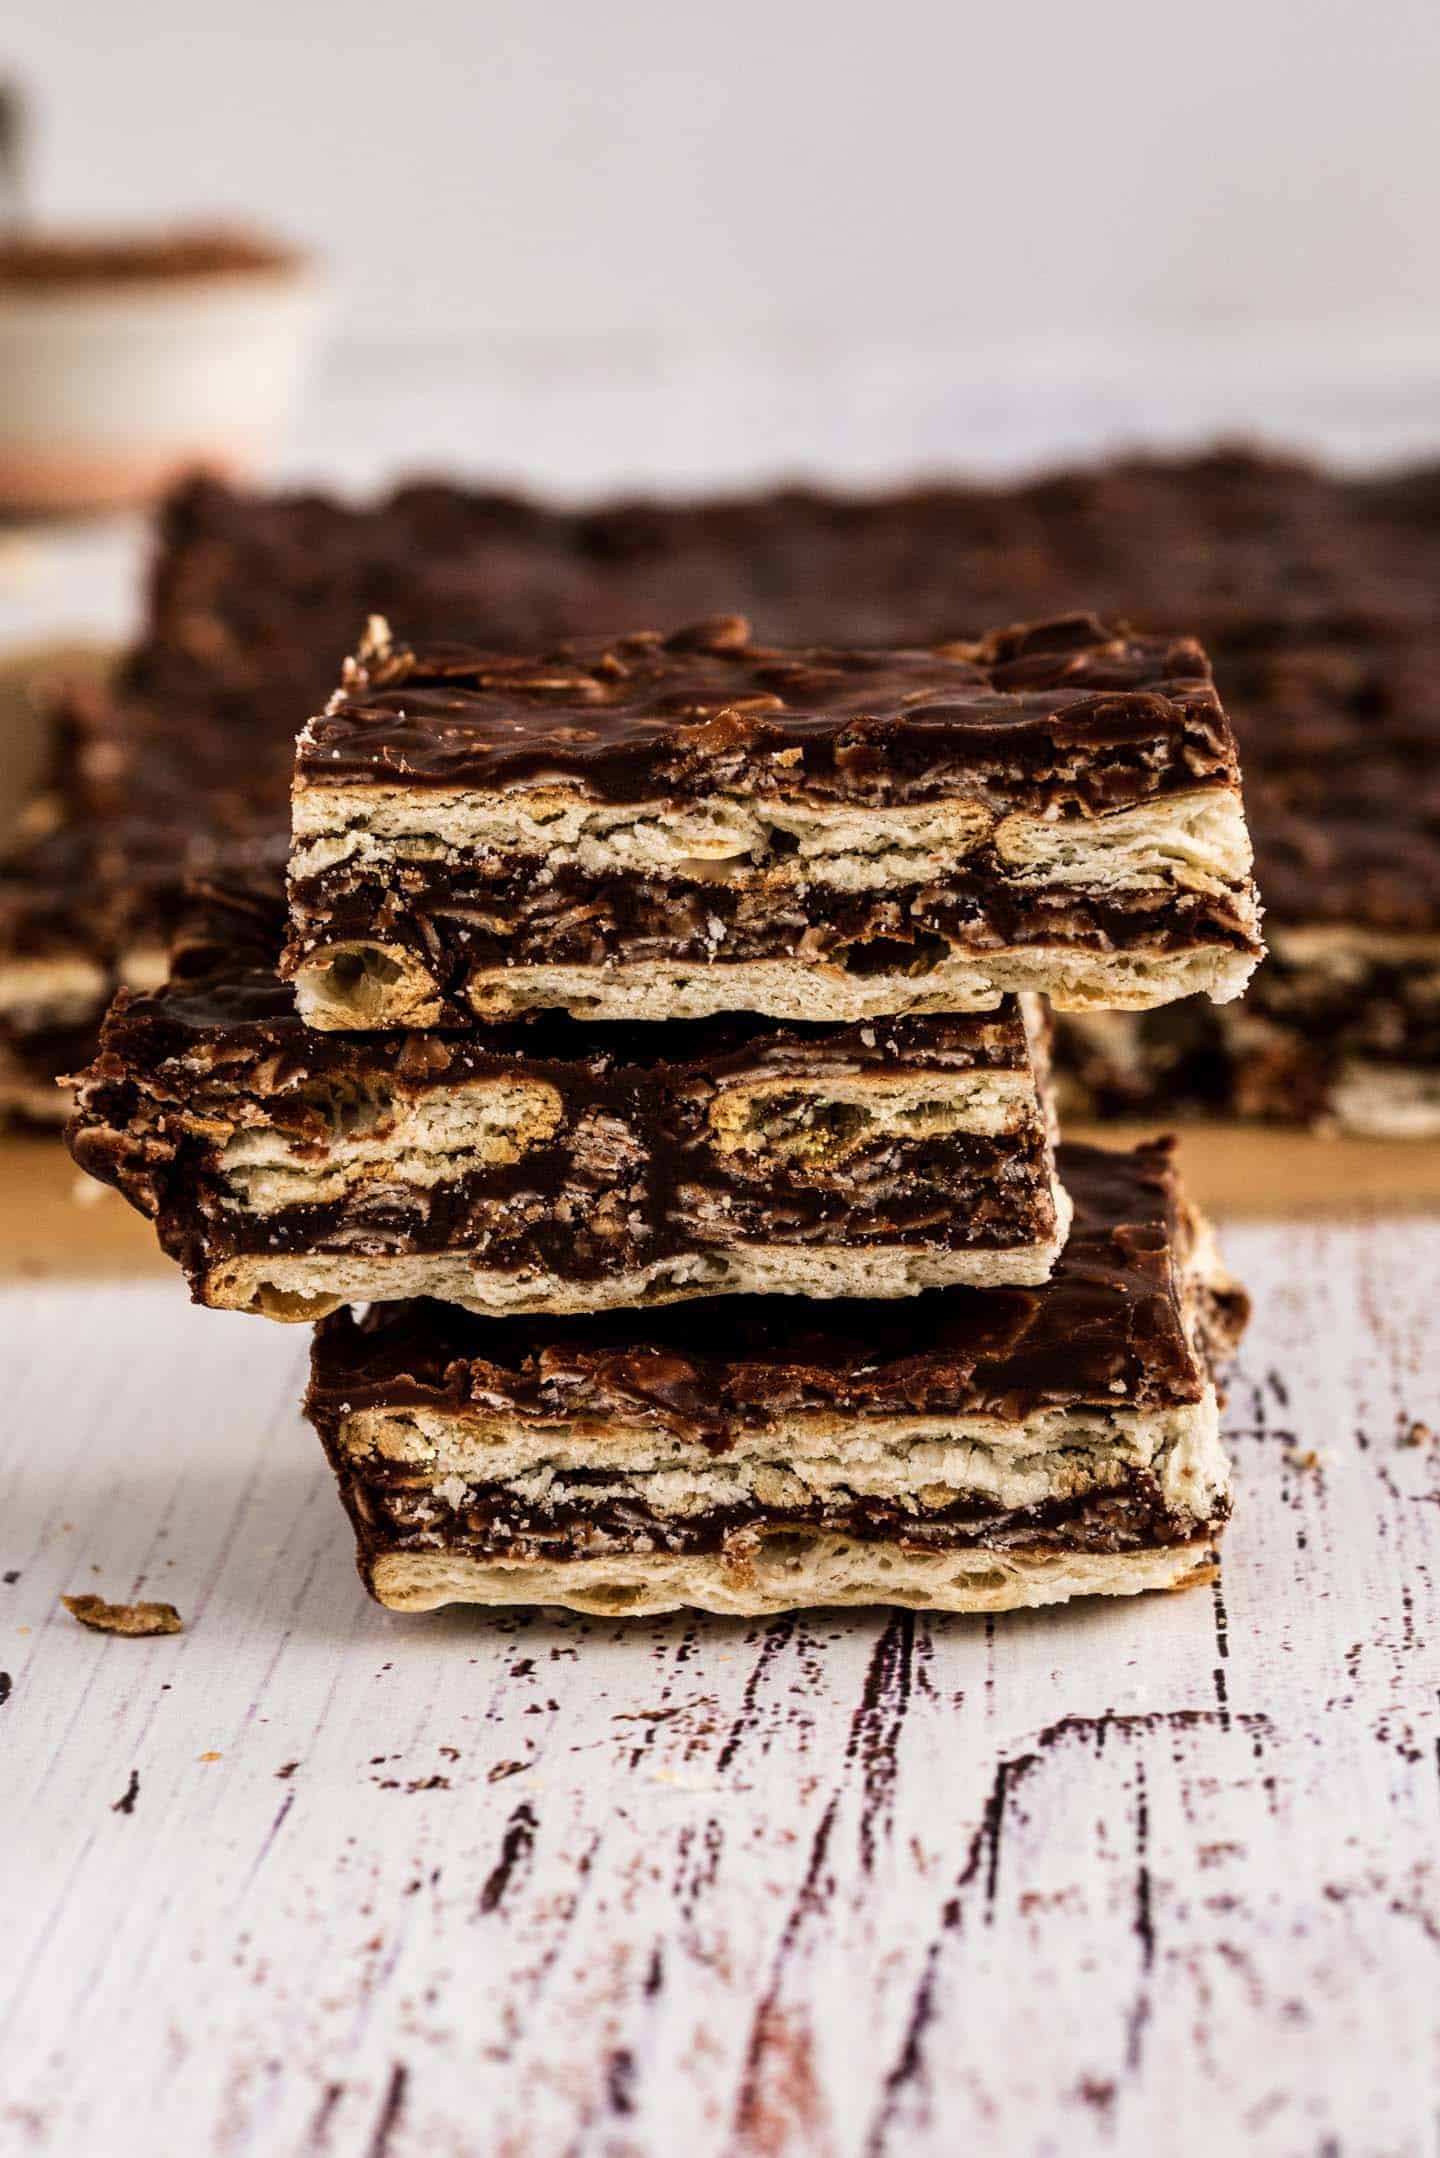 Melted chocolate and oats in layers of crackers, an absolute classic of many Argentinians' childhood.